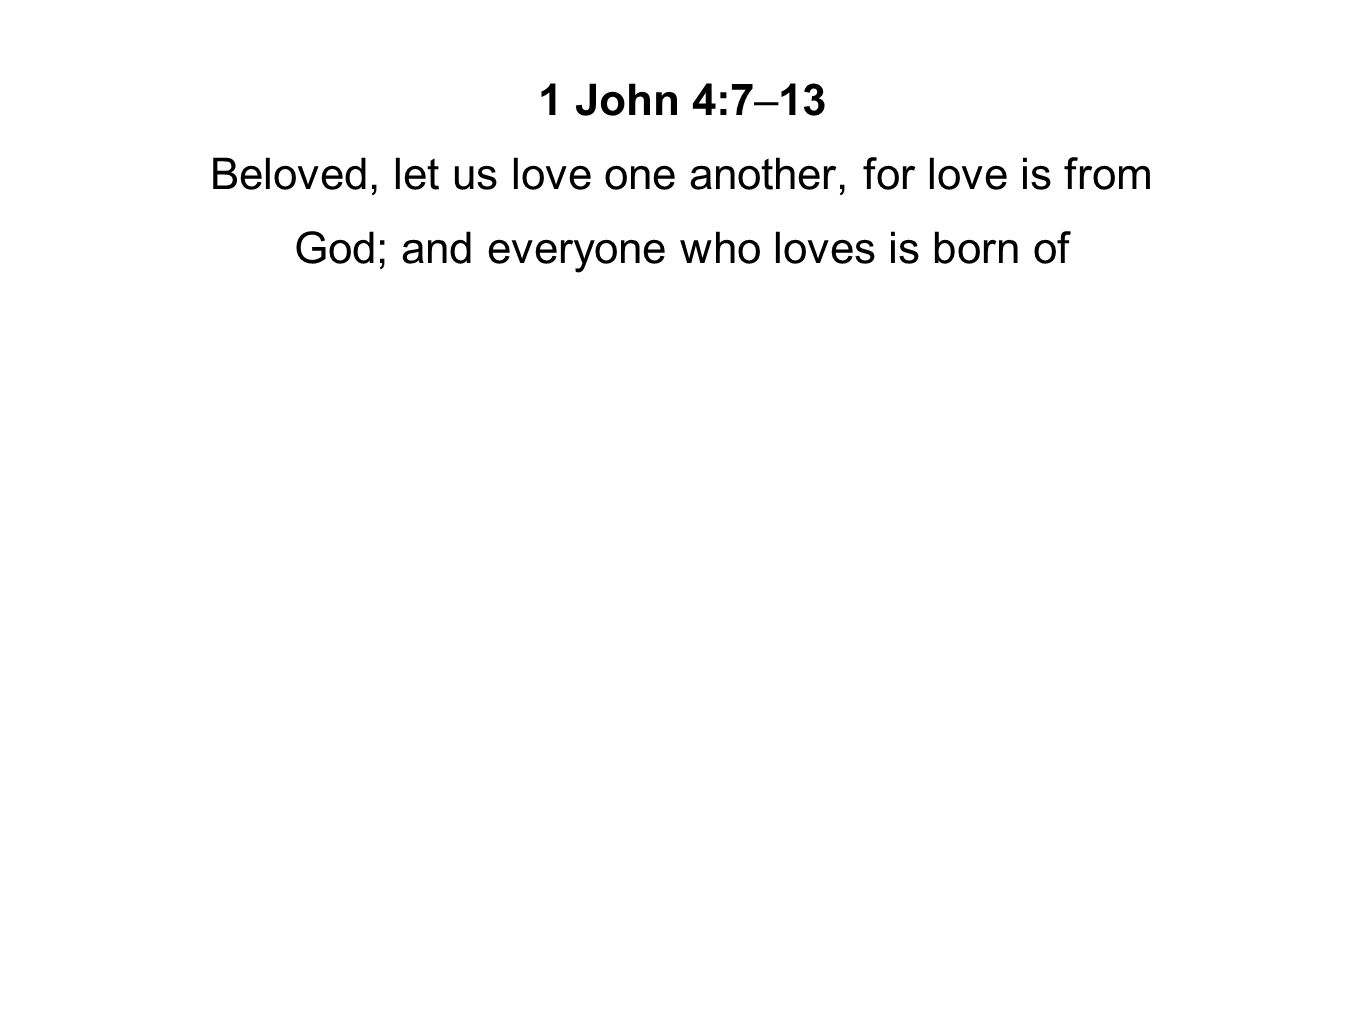 1 John 4:7–13 Beloved, let us love one another, for love is from God; and everyone who loves is born of